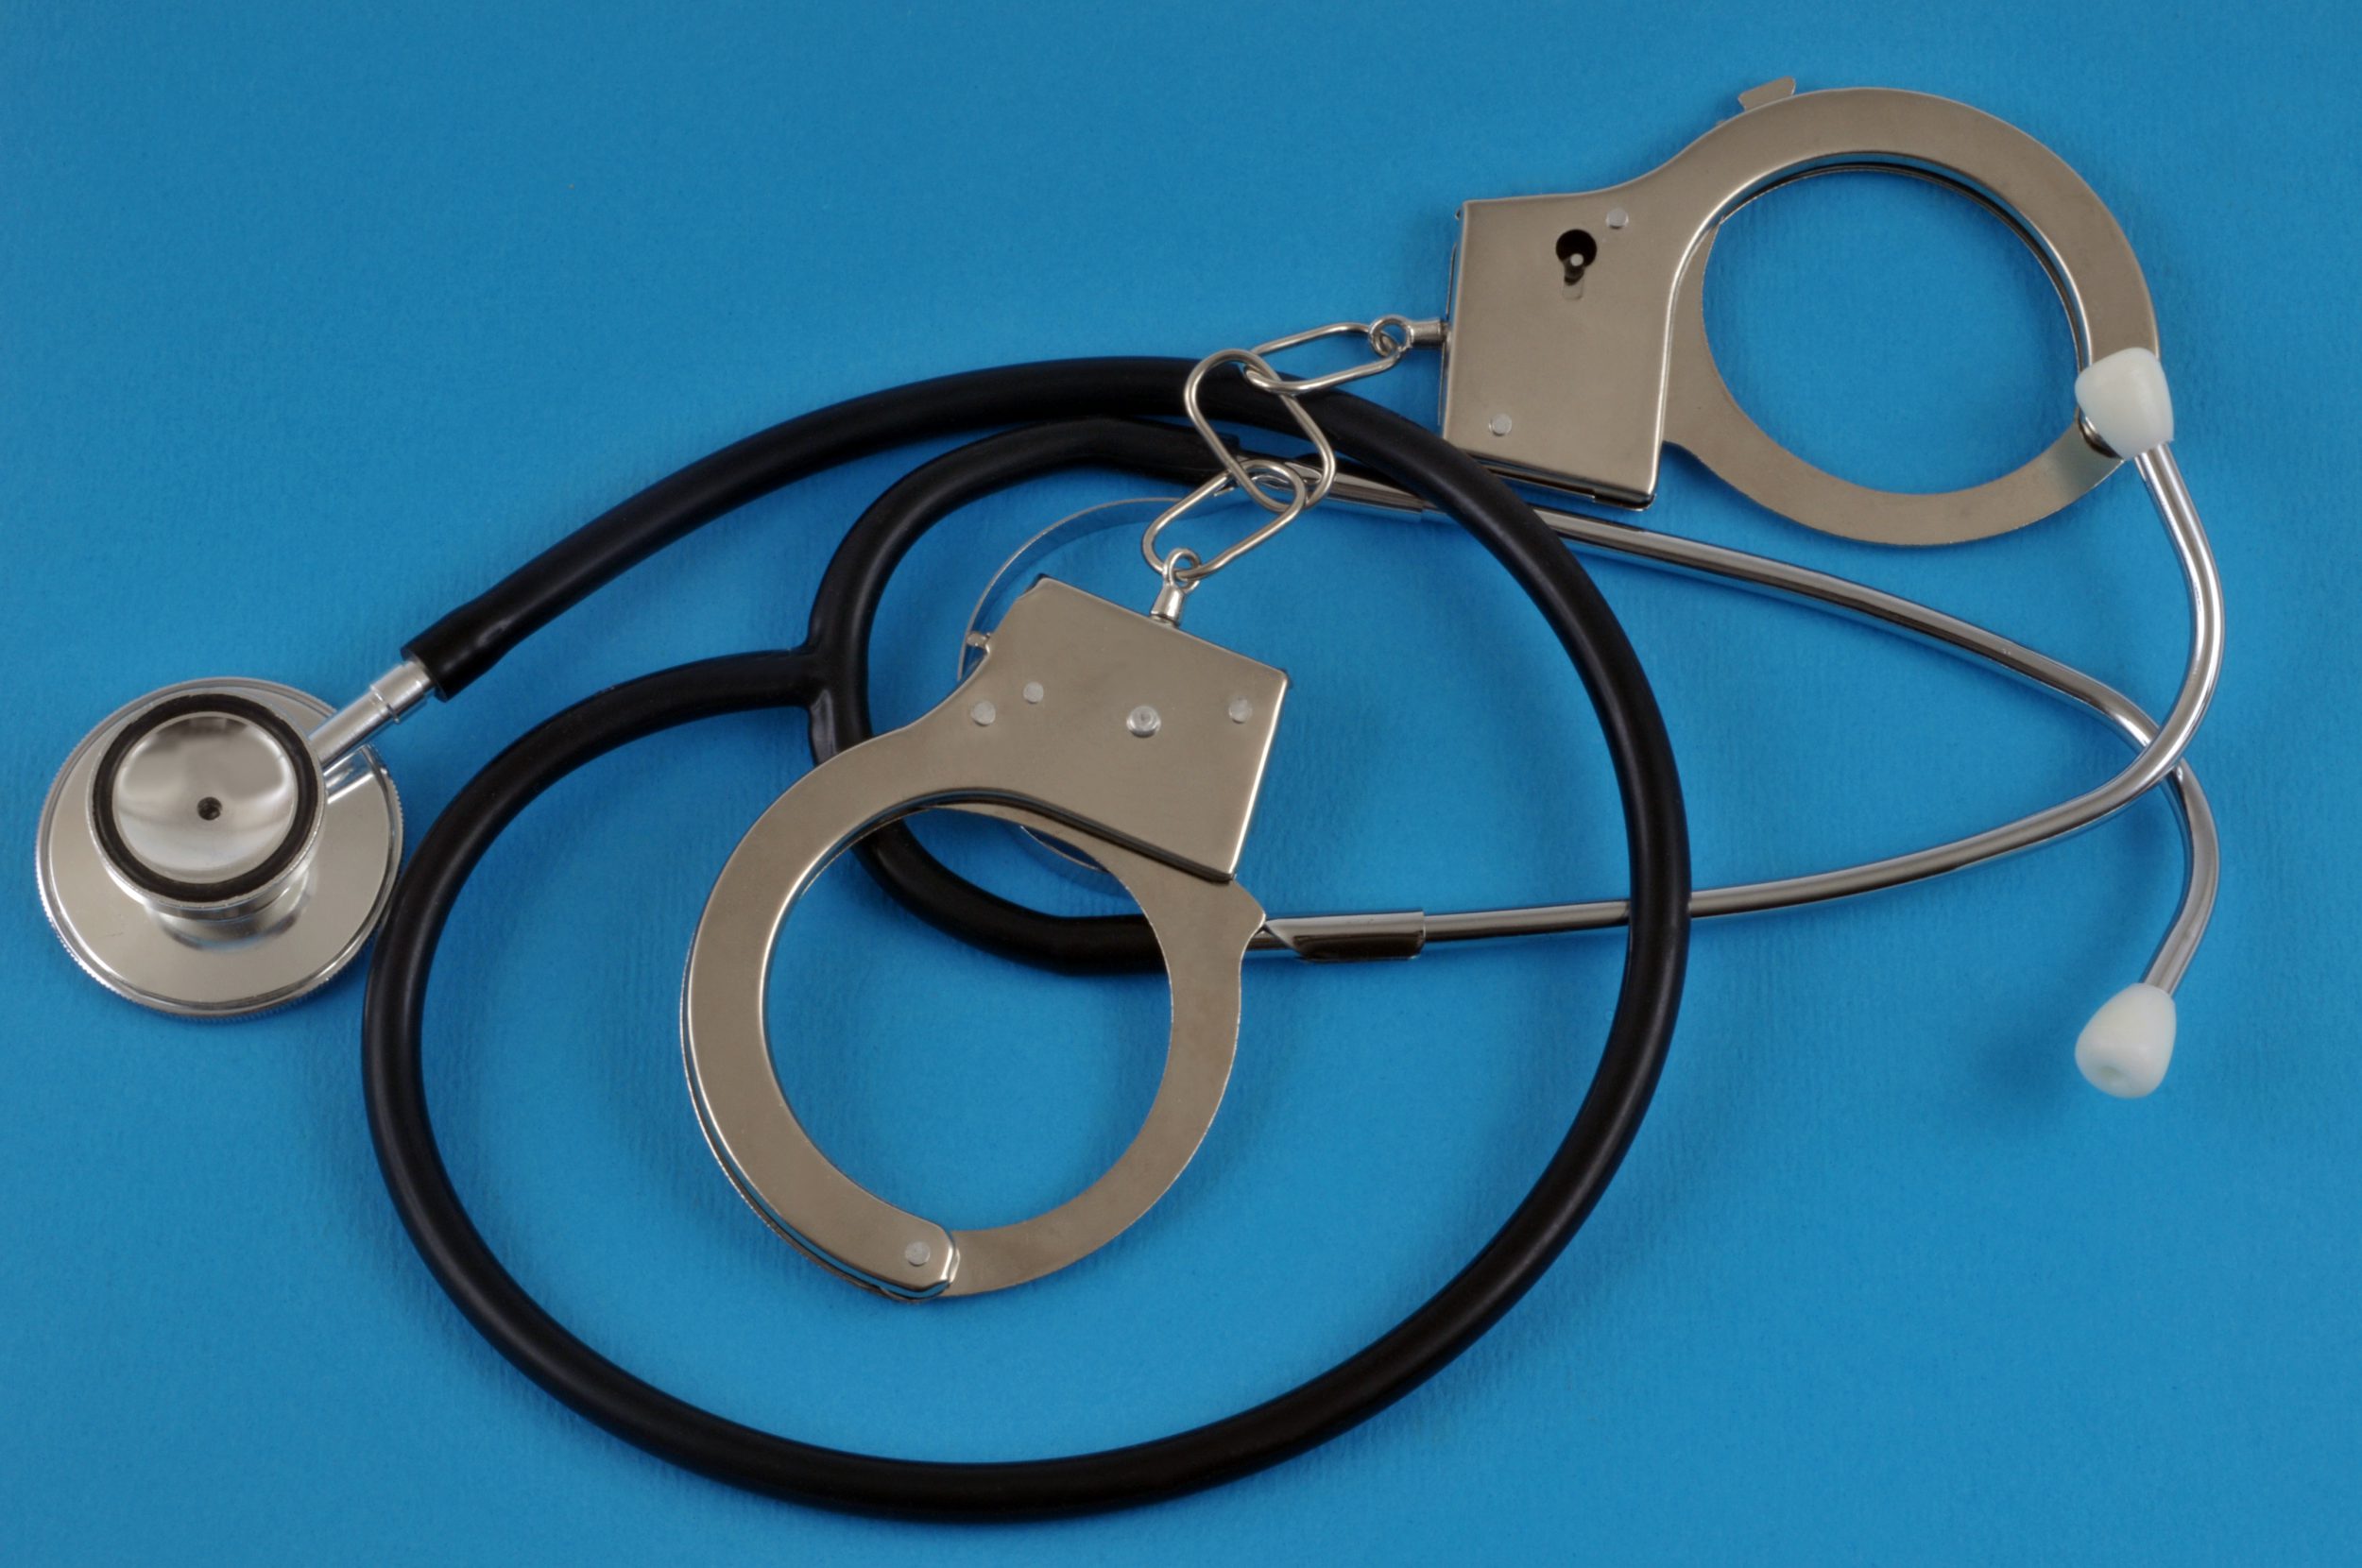 Medical error misdiagnosis concept with handcuffs and stethoscope on a blue background